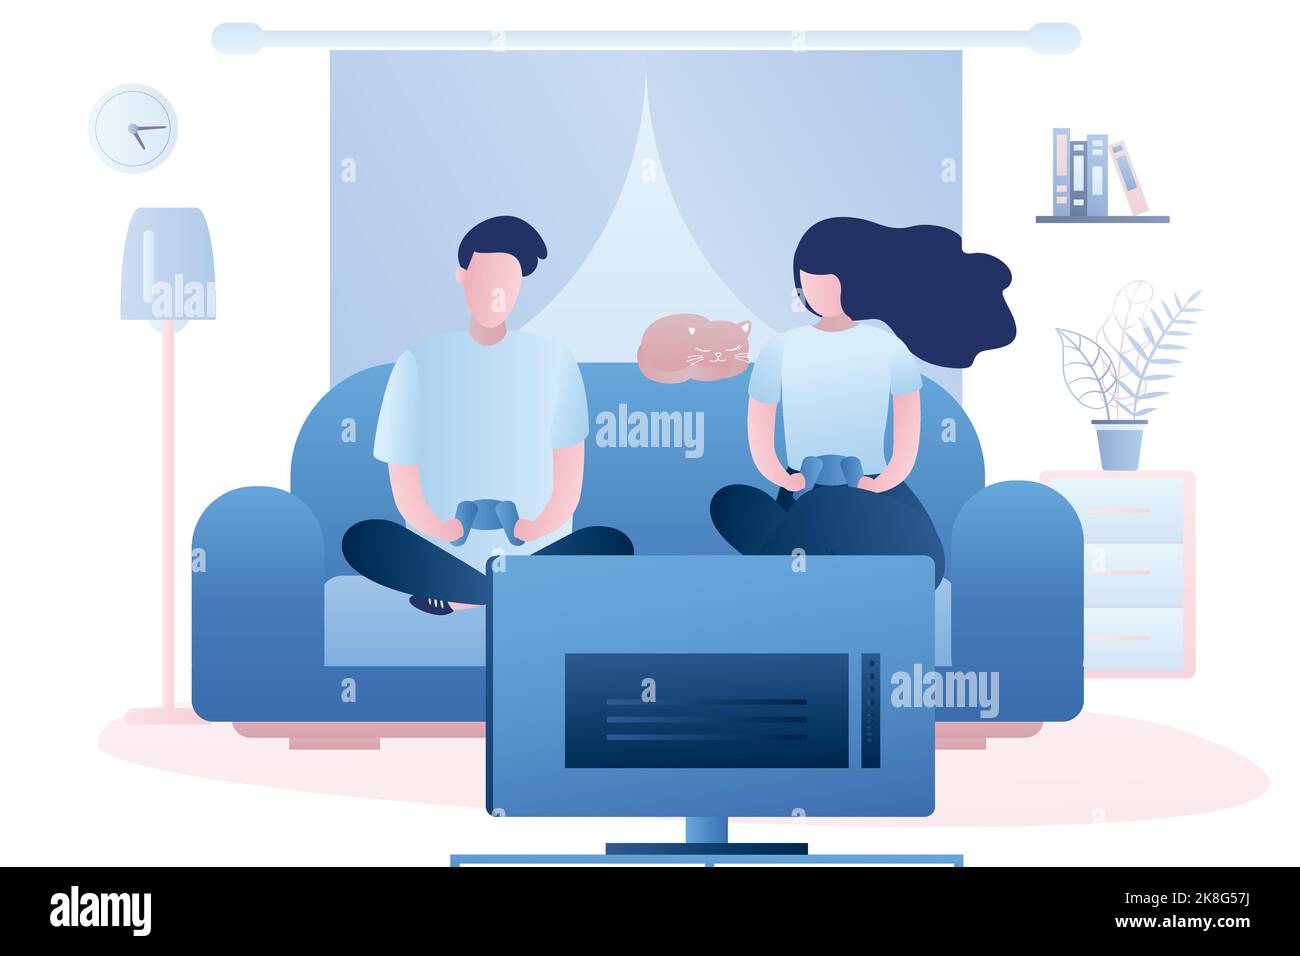 Couple of young people sitting on the couch. Two adults are holding a controllers and playing a game on TV. Living room interior with furniture. Human Stock Vector